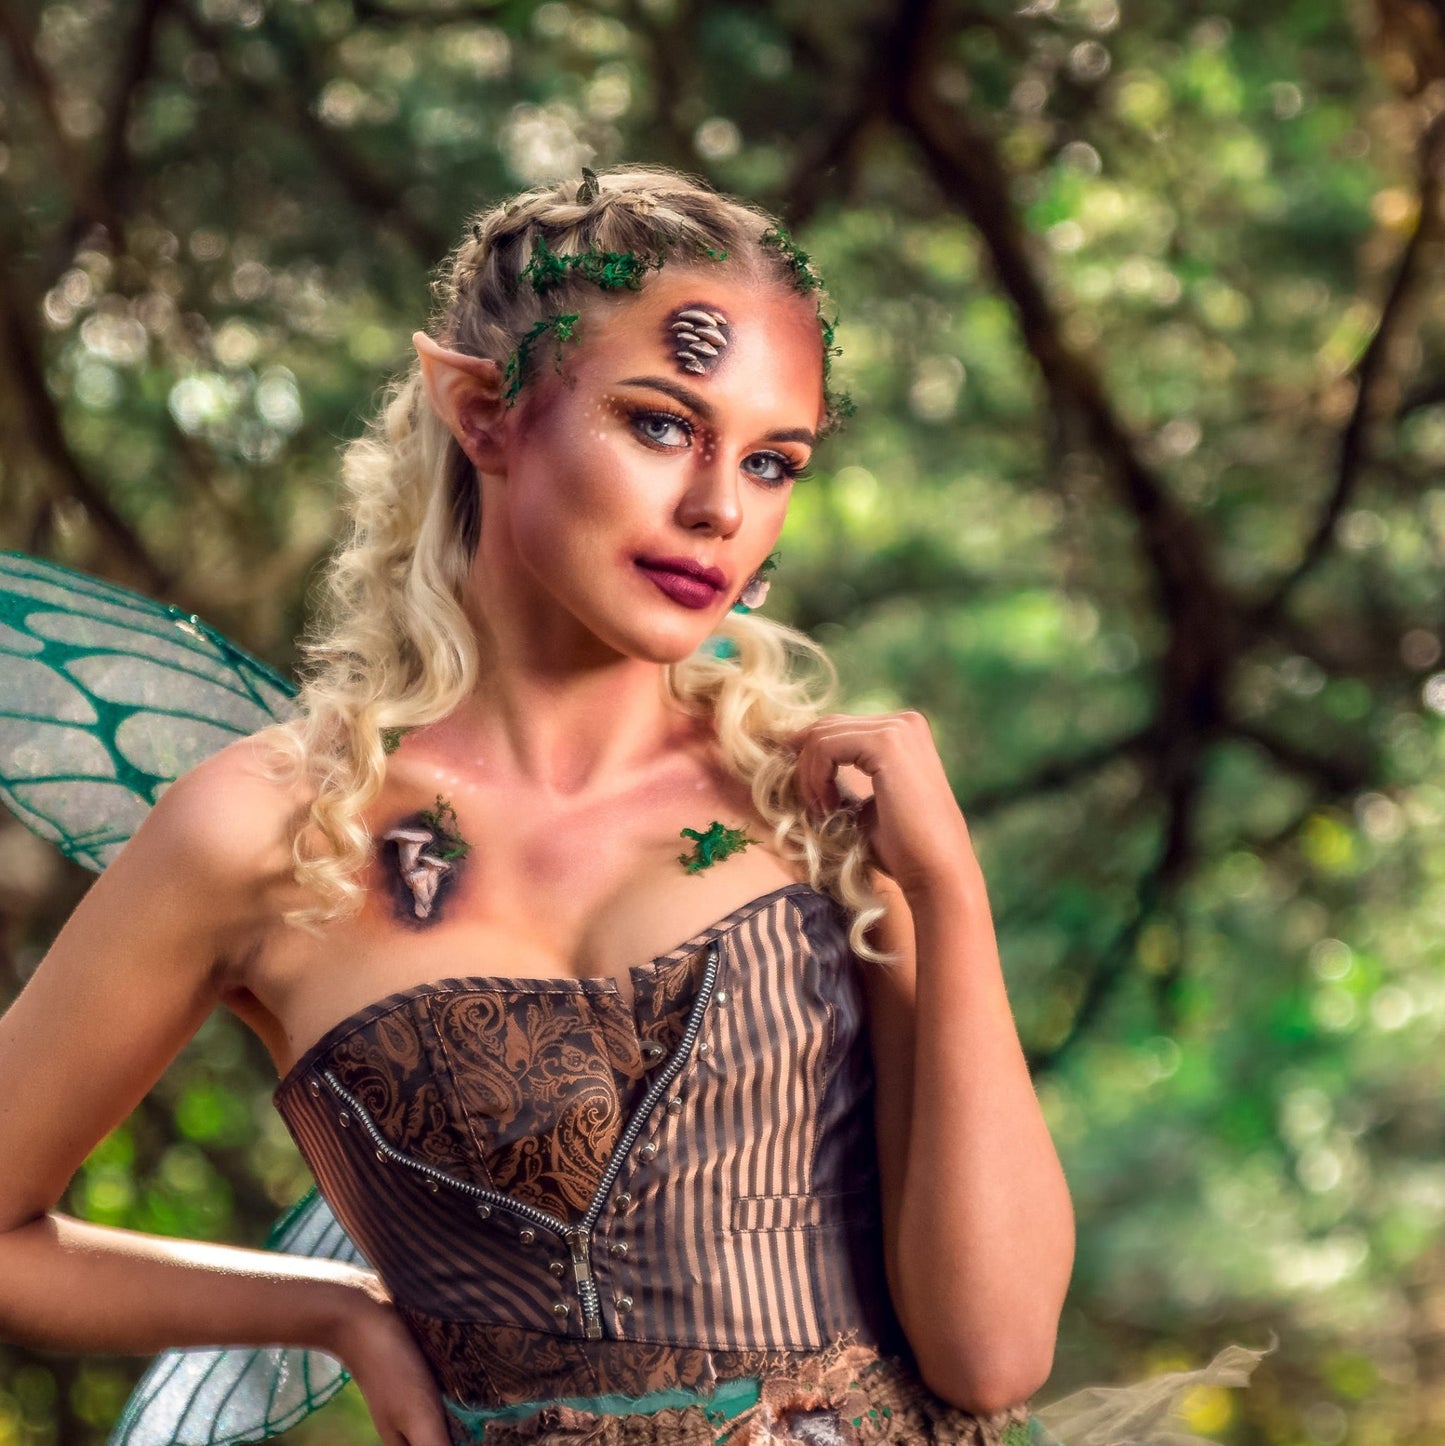 Blond woman dressed as a fairy with fungi prosthetics on her face and chest